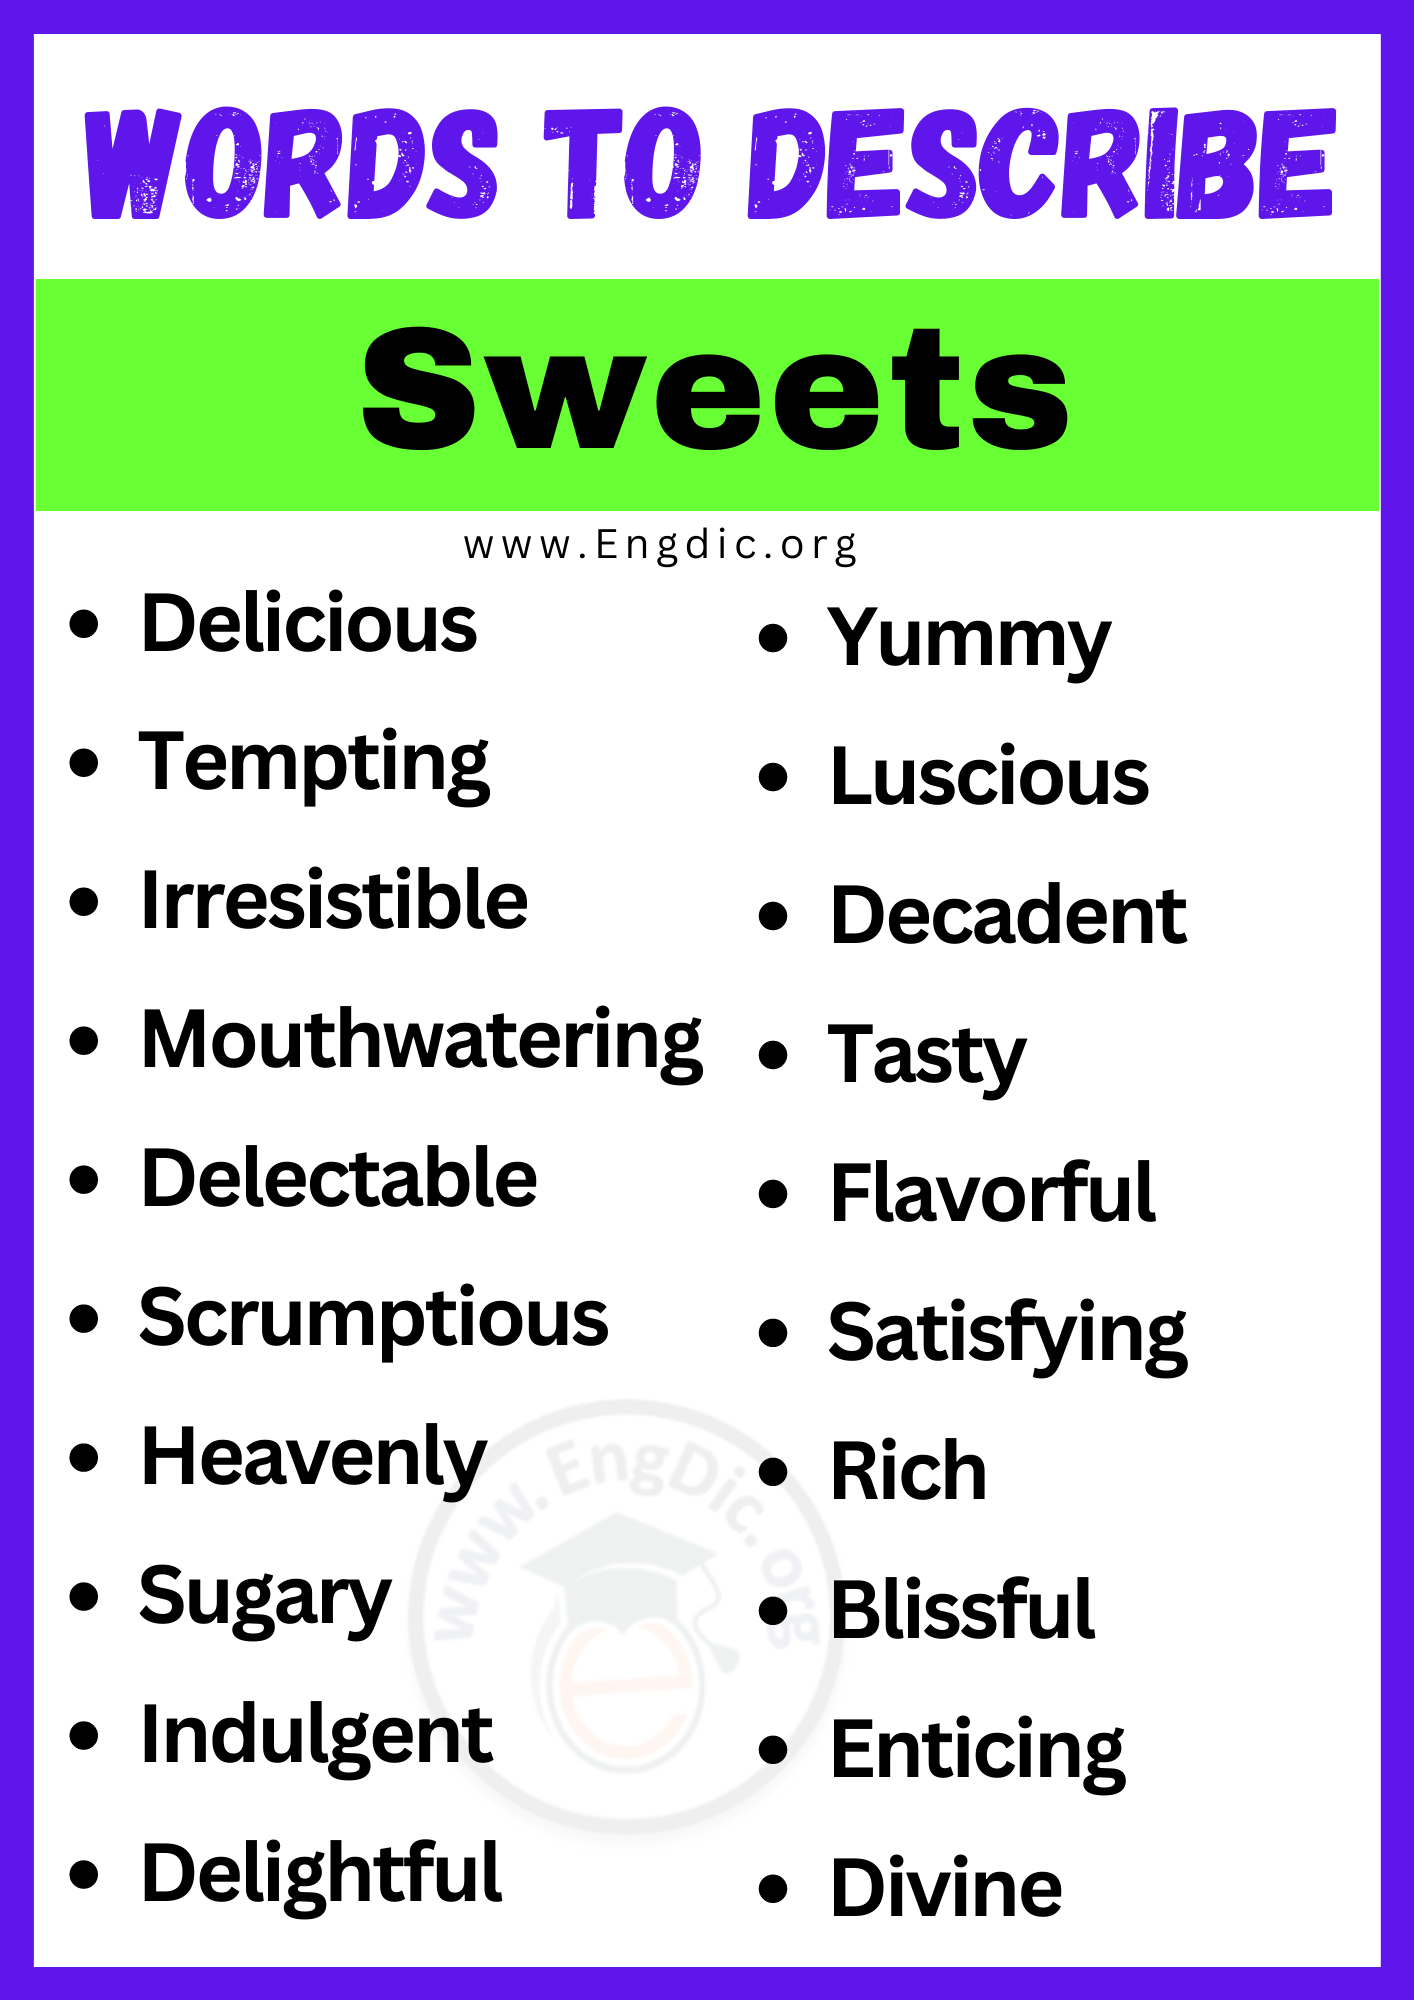 Words to Describe Sweets